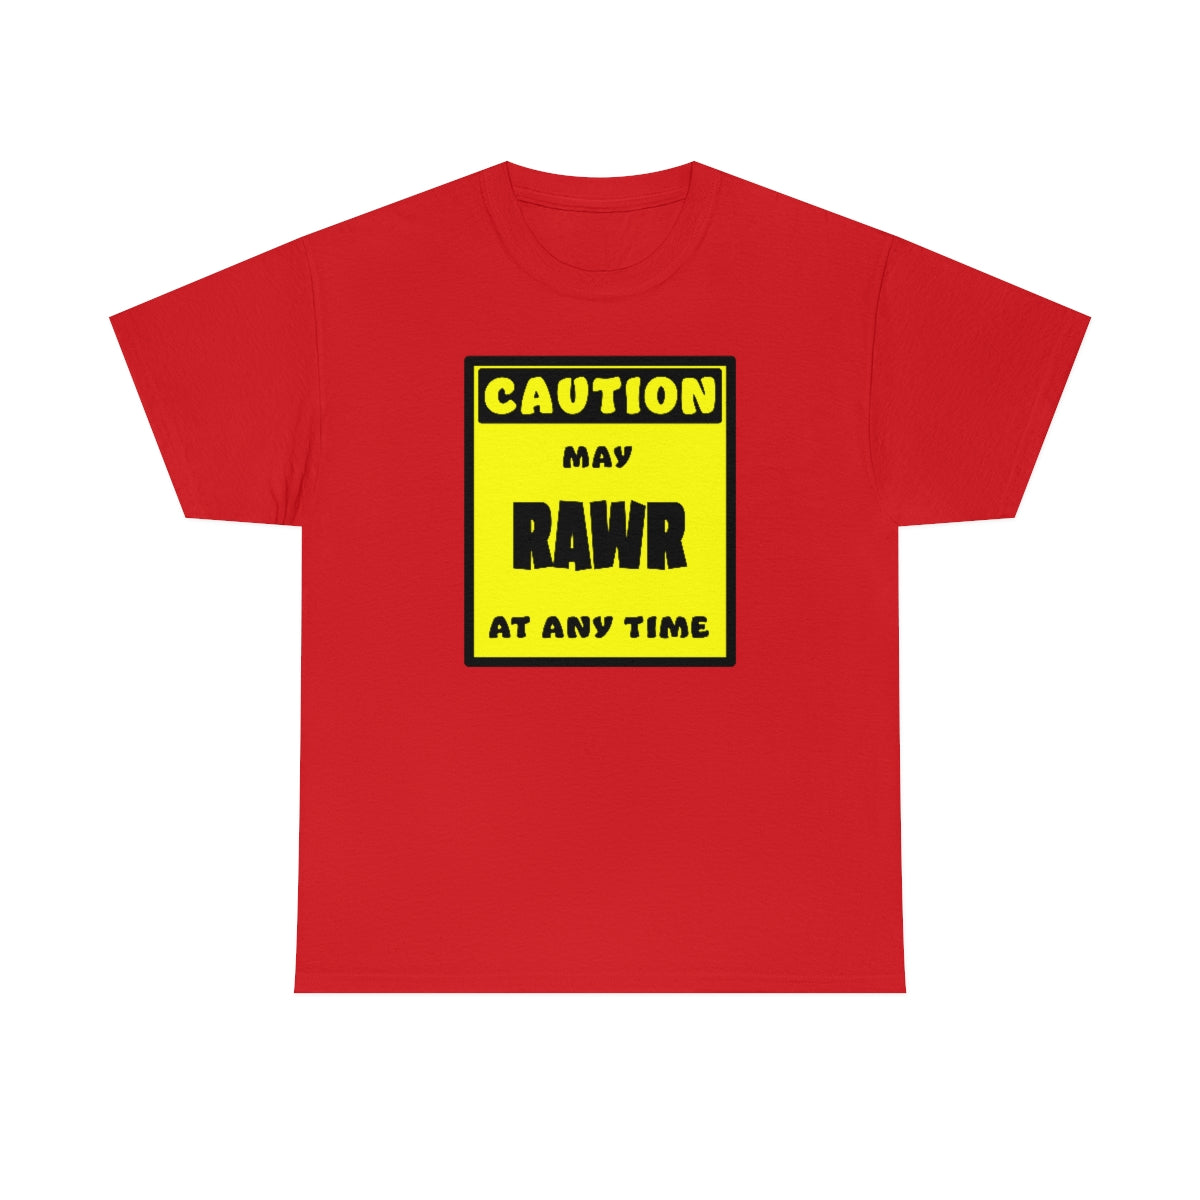 CAUTION! May RAWR at any time! - T-Shirt T-Shirt Artworktee Red S 